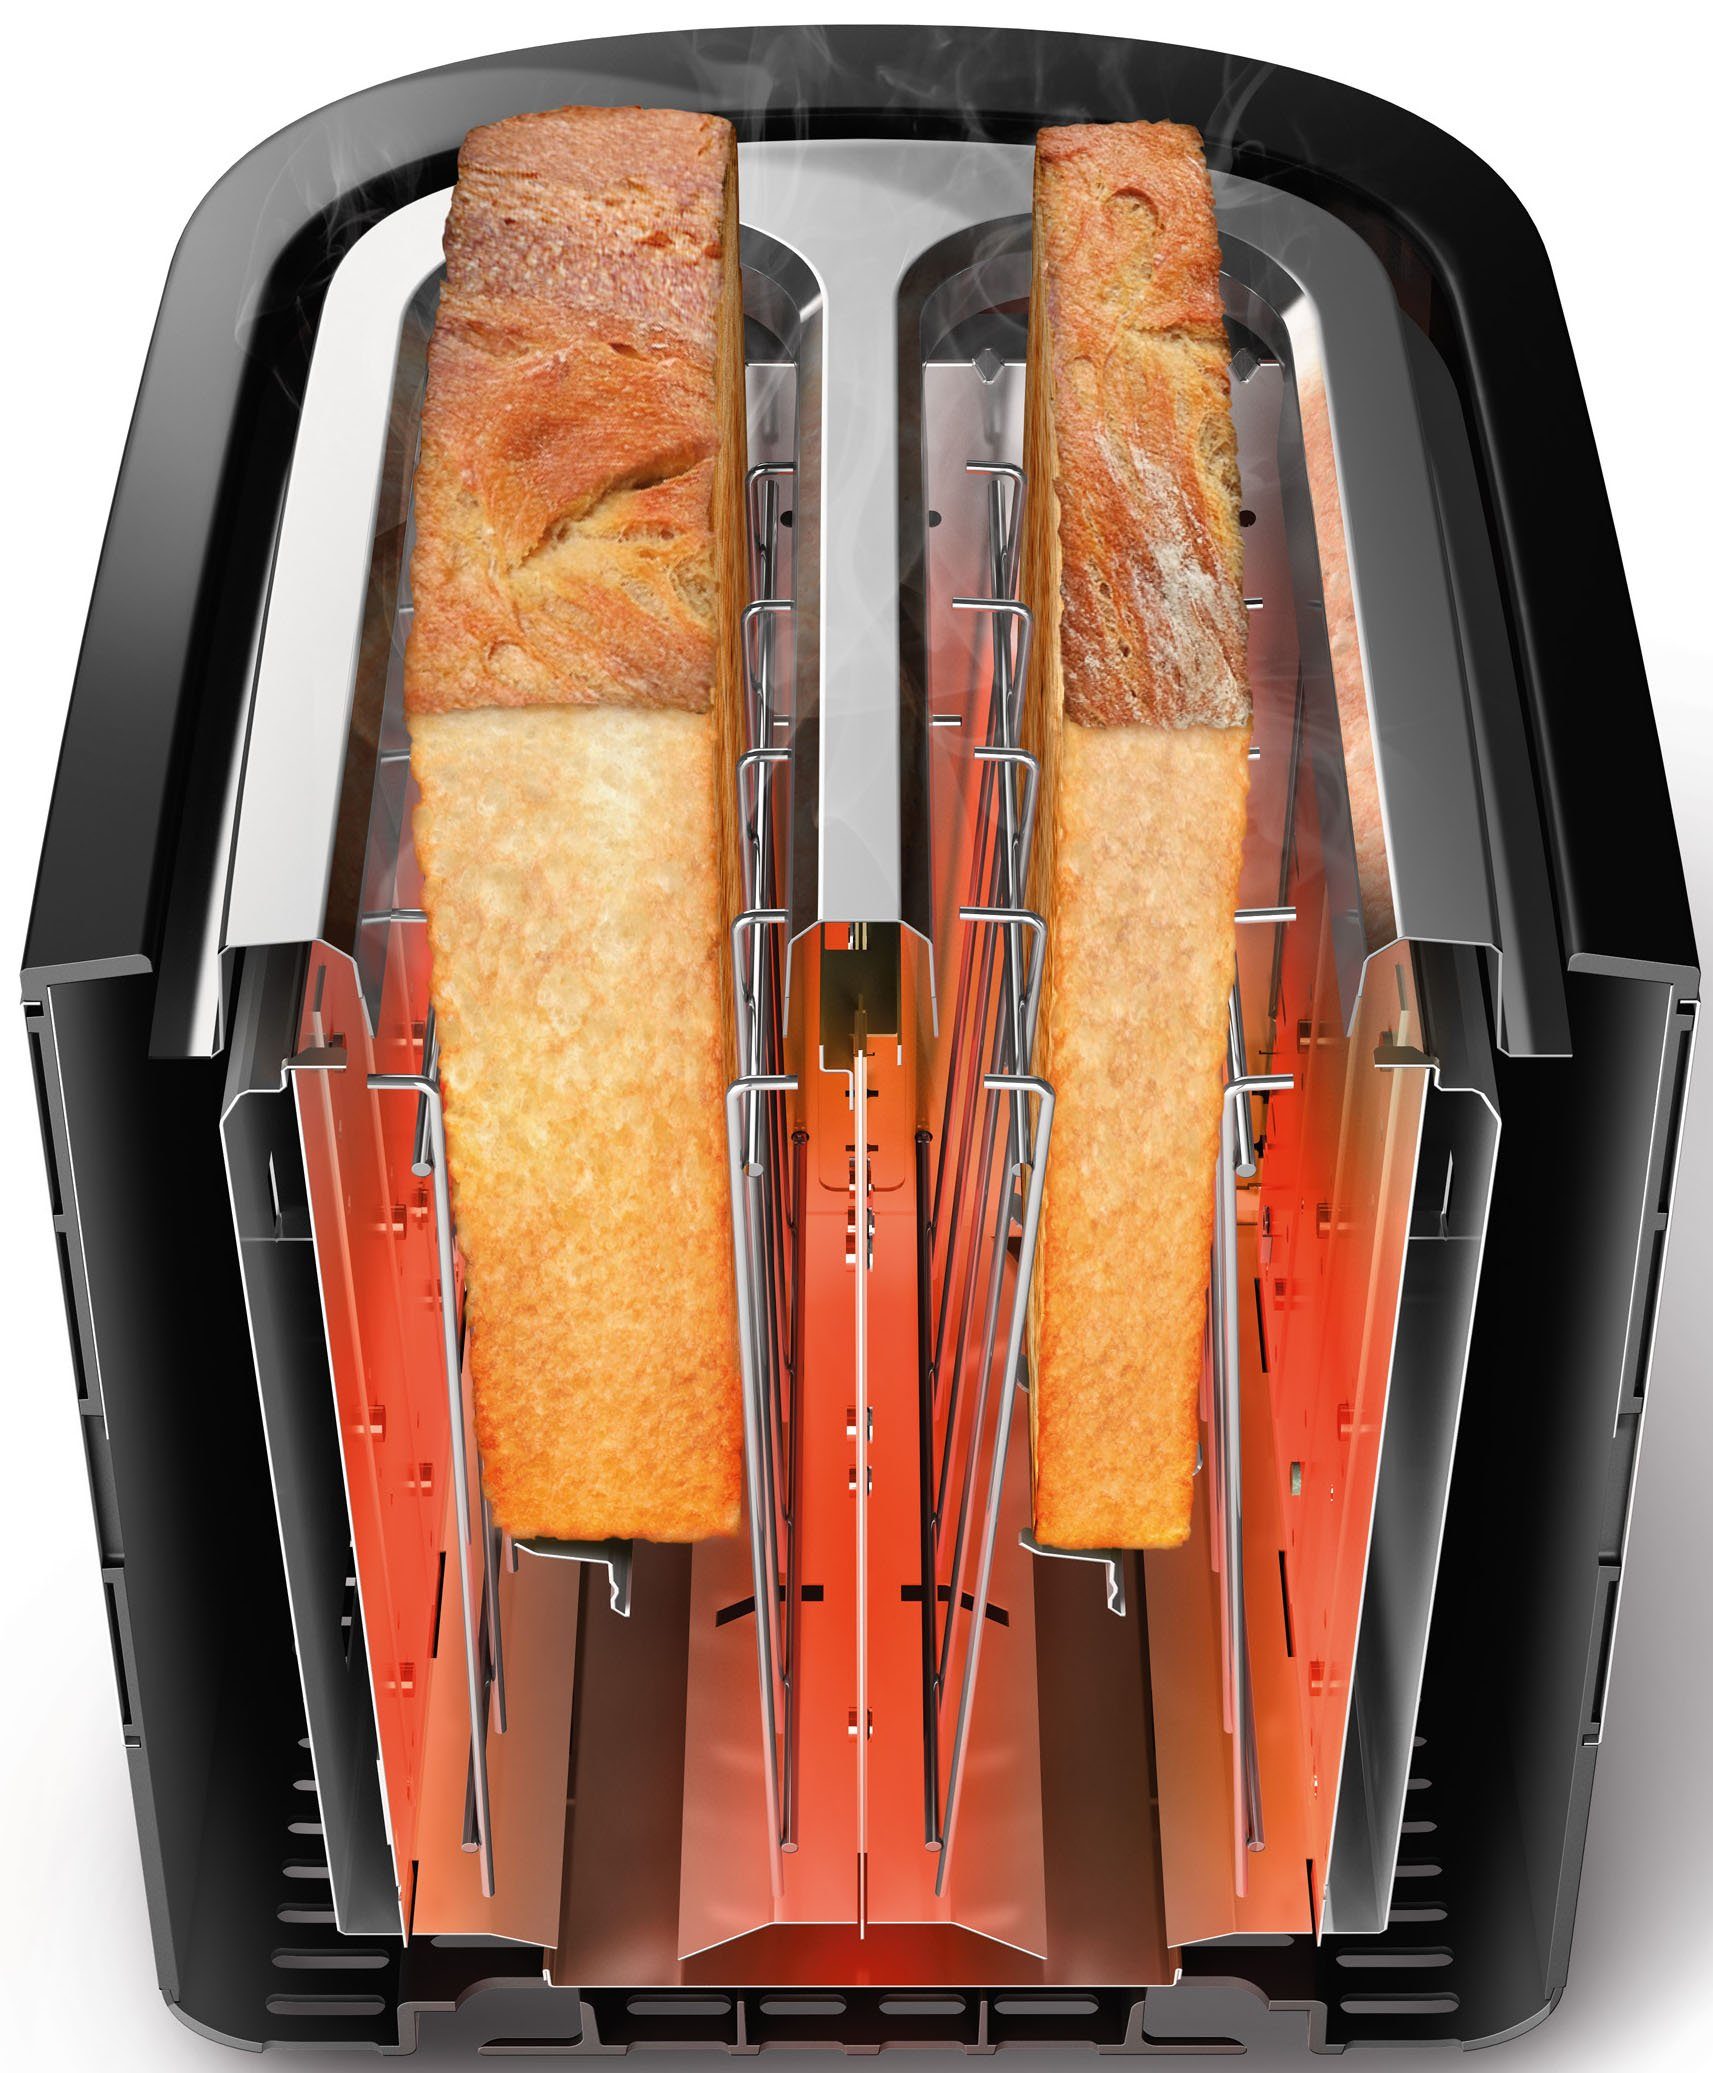 Toaster Philips 730 HD2639/90, W